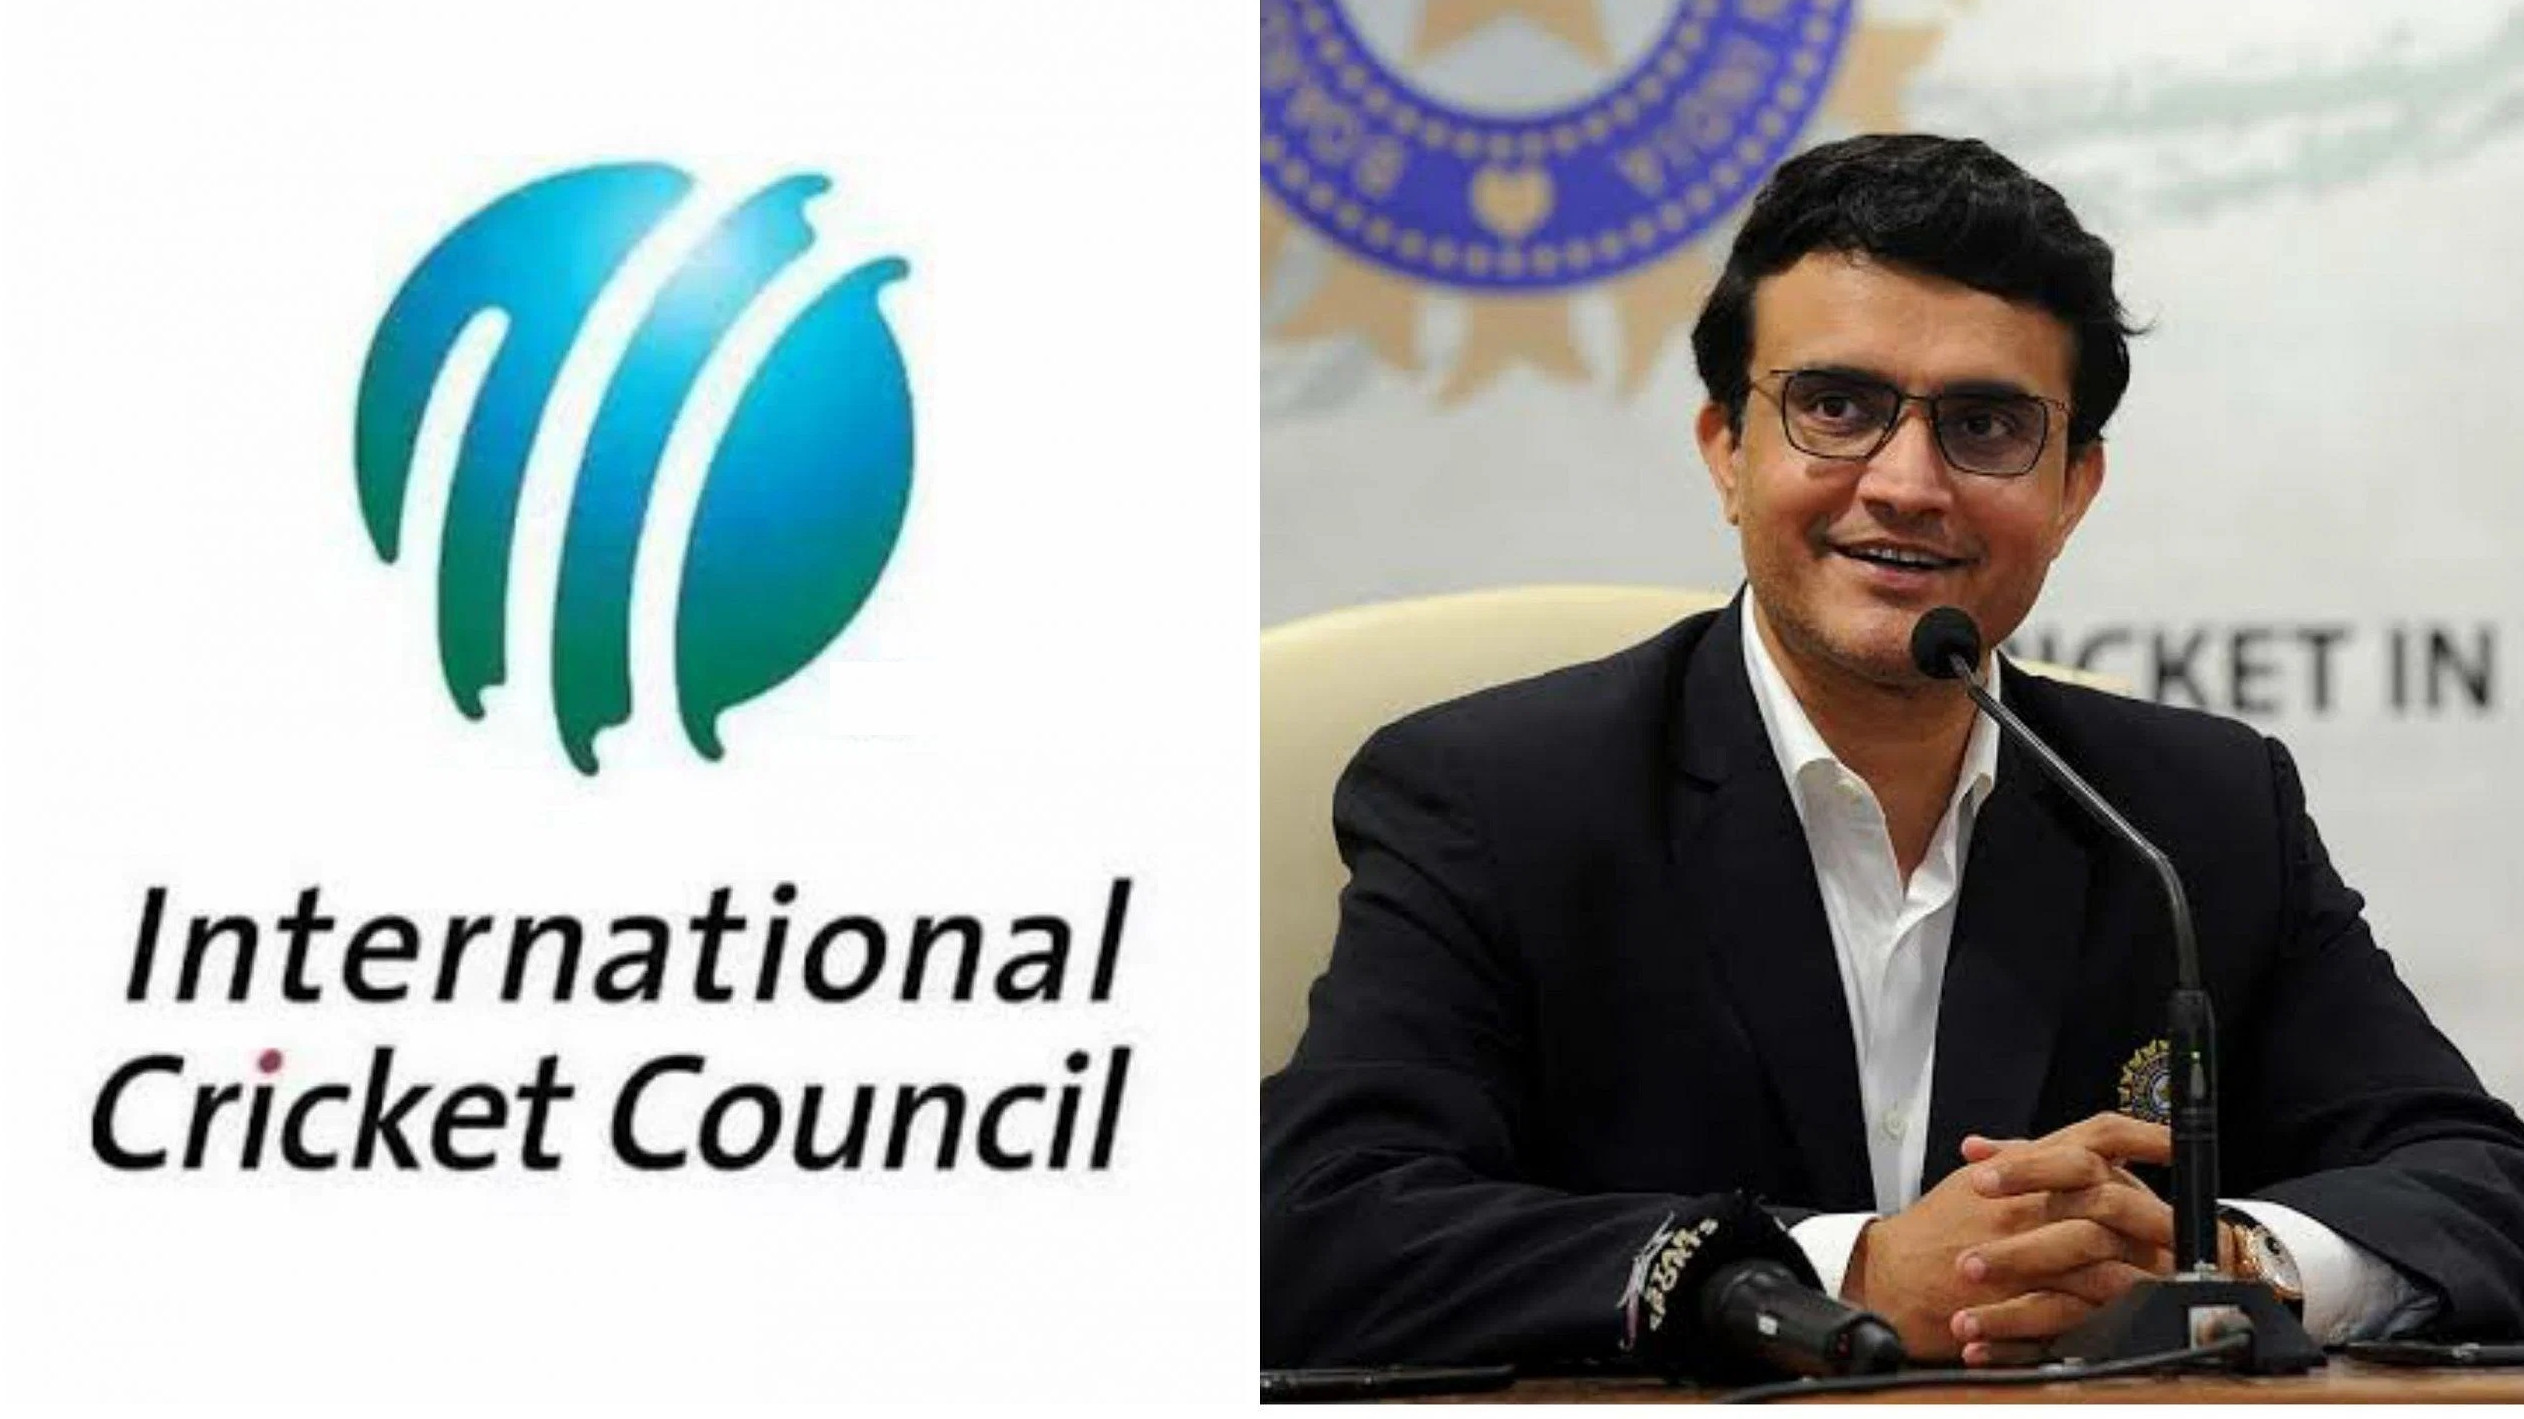 Sourav Ganguly could contest election to be next ICC Chairman; Jay Shah in line to become BCCI president- Report